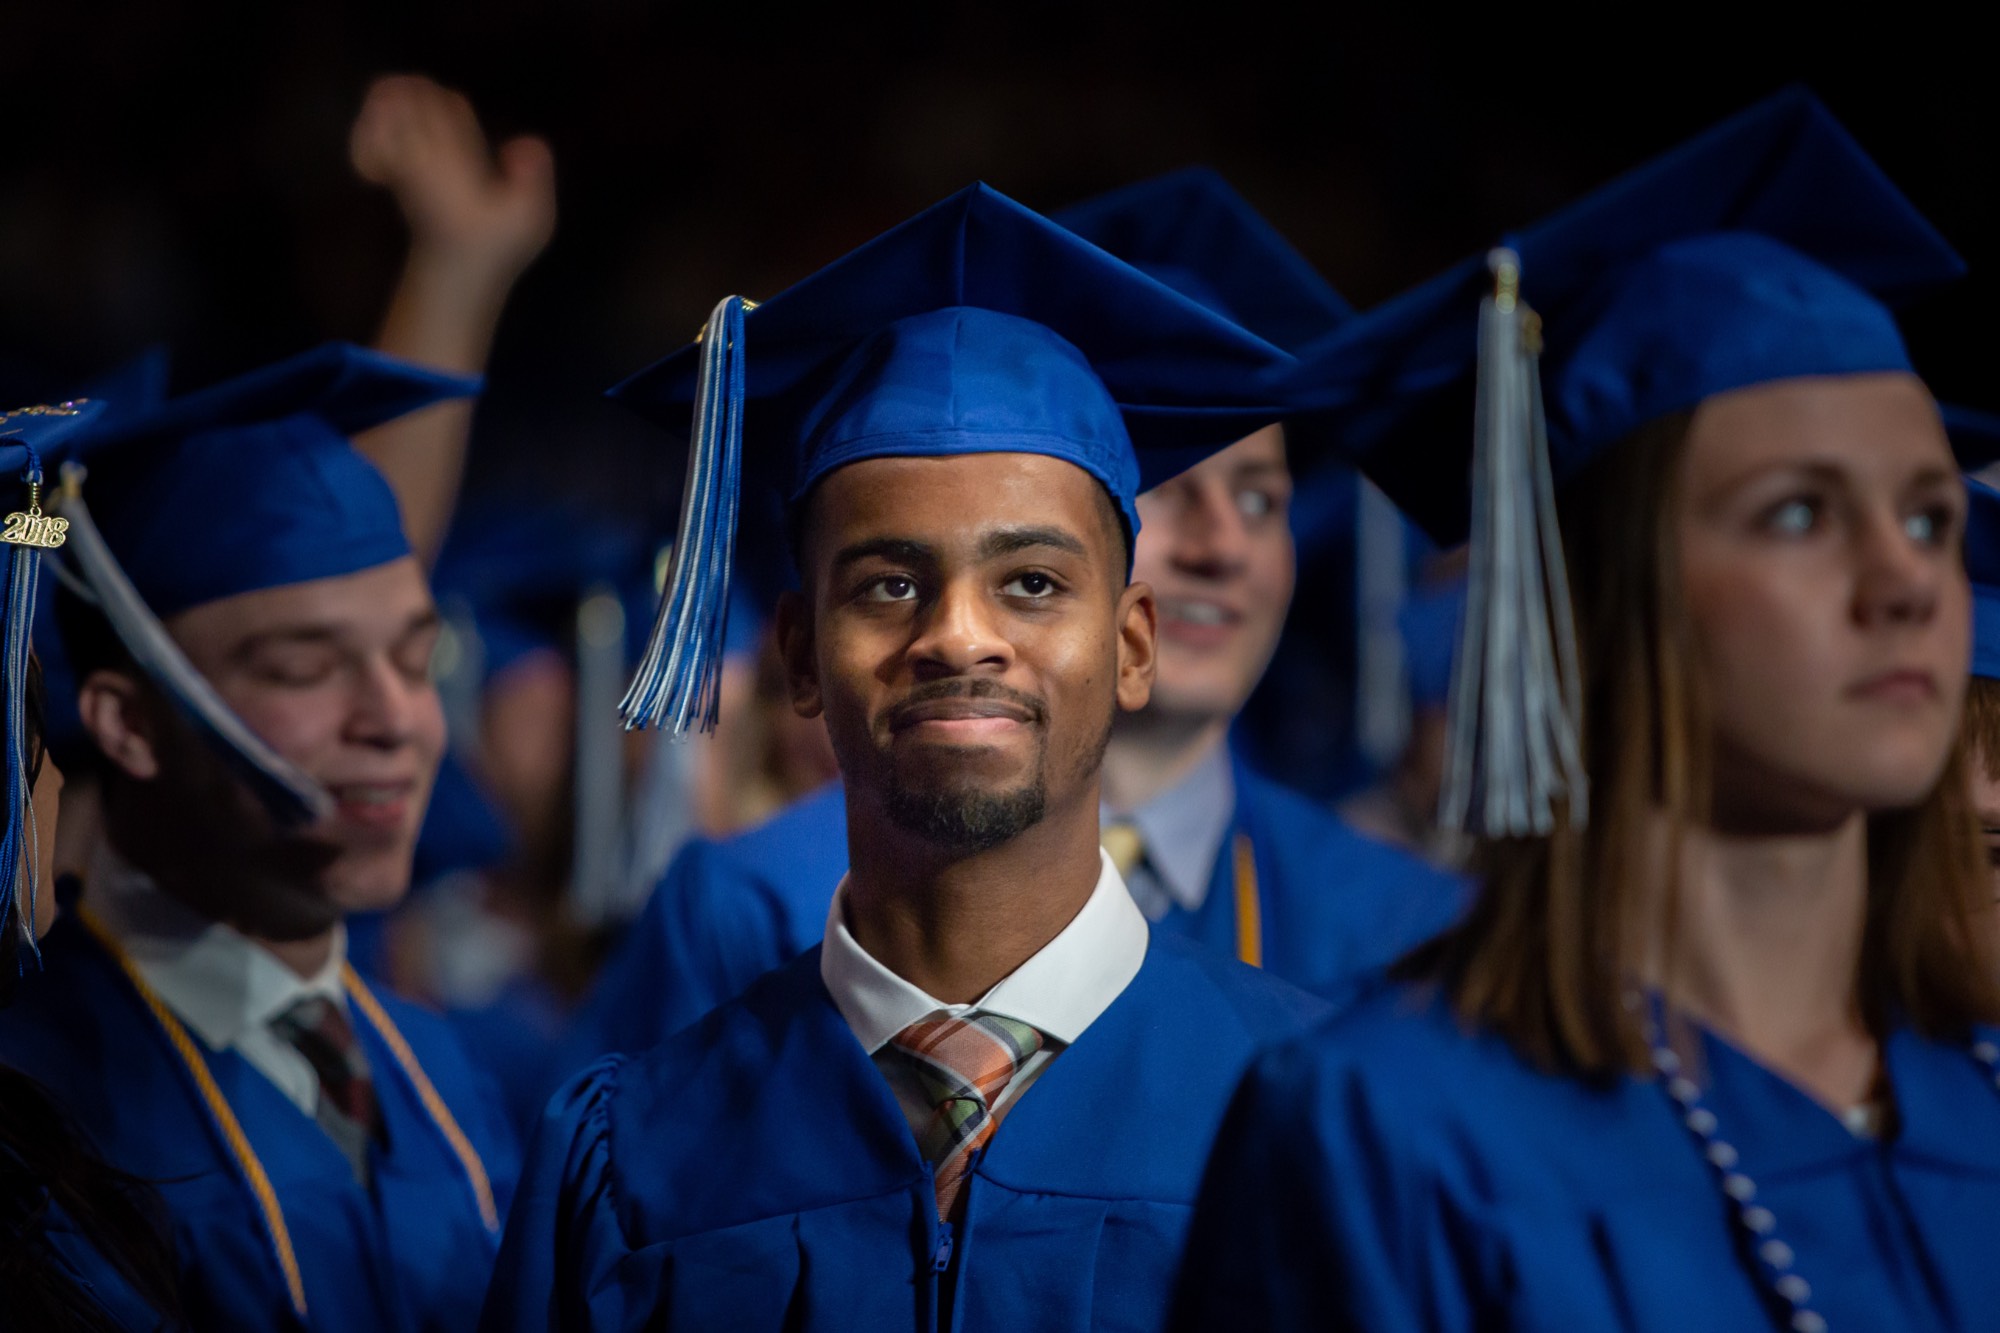 Student smiling proudly at graduation wearing a blue Academic Cap